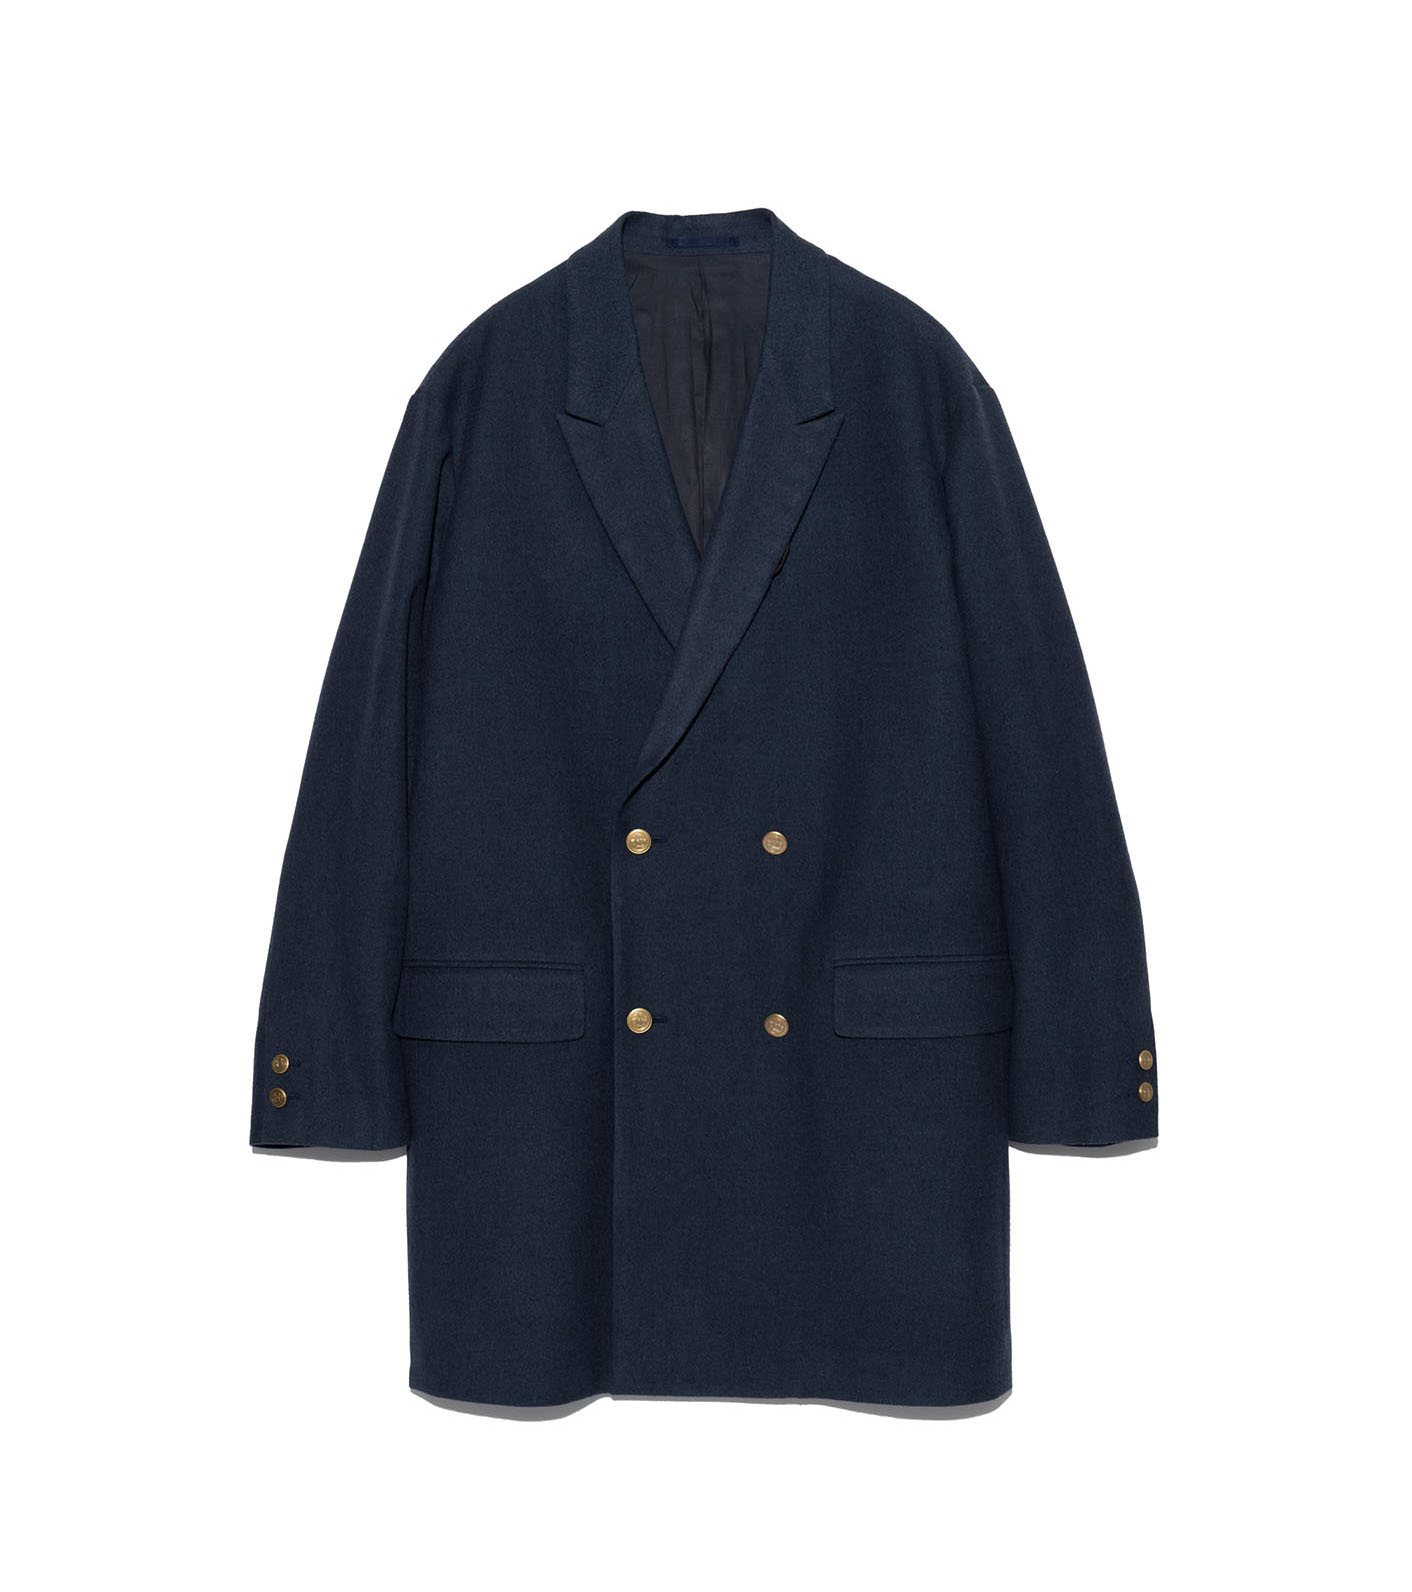 nanamica / Wool Double Breasted Jacket